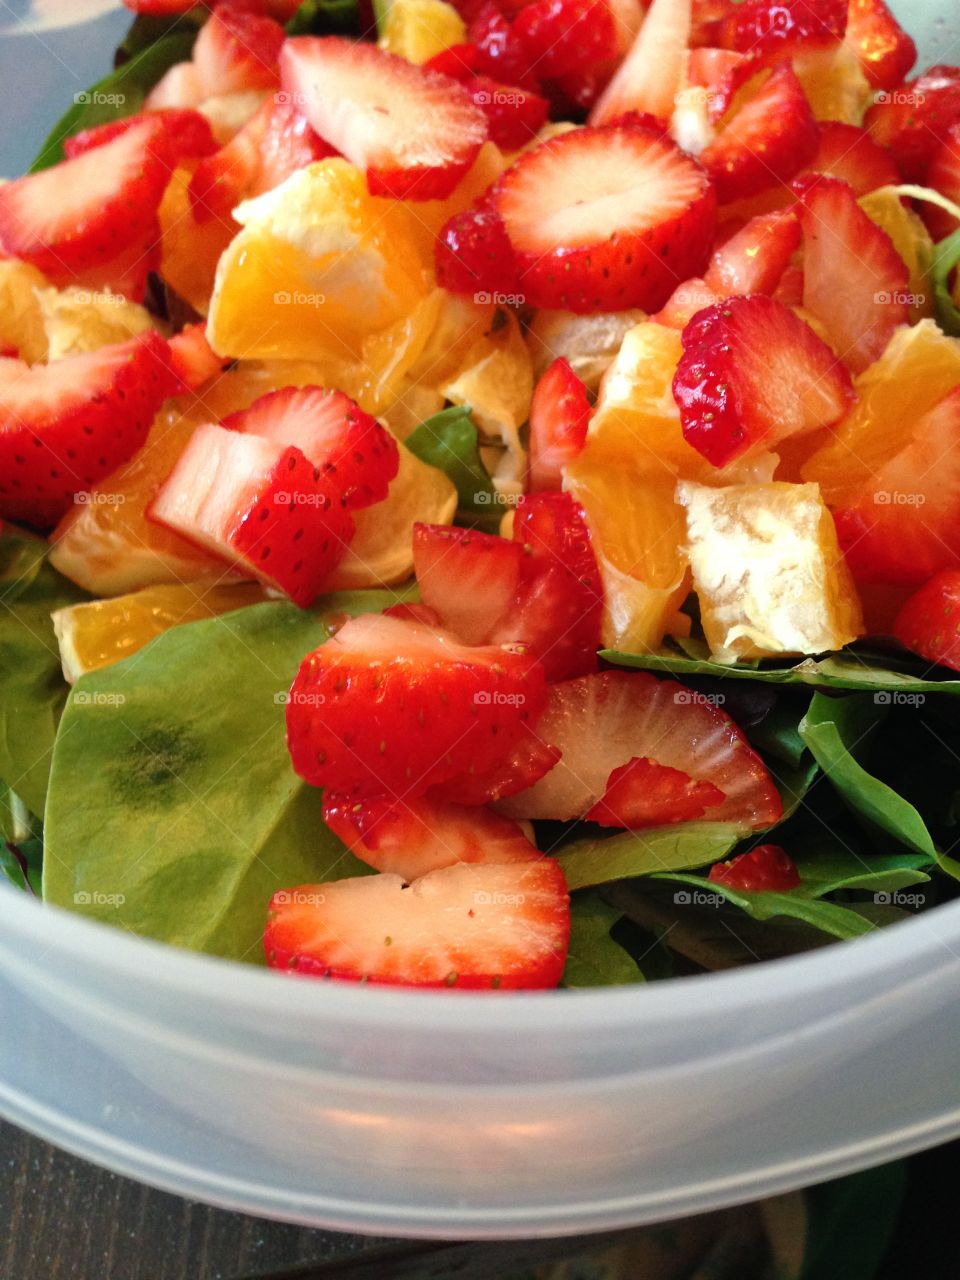 Summer salad with strawberries and oranges.